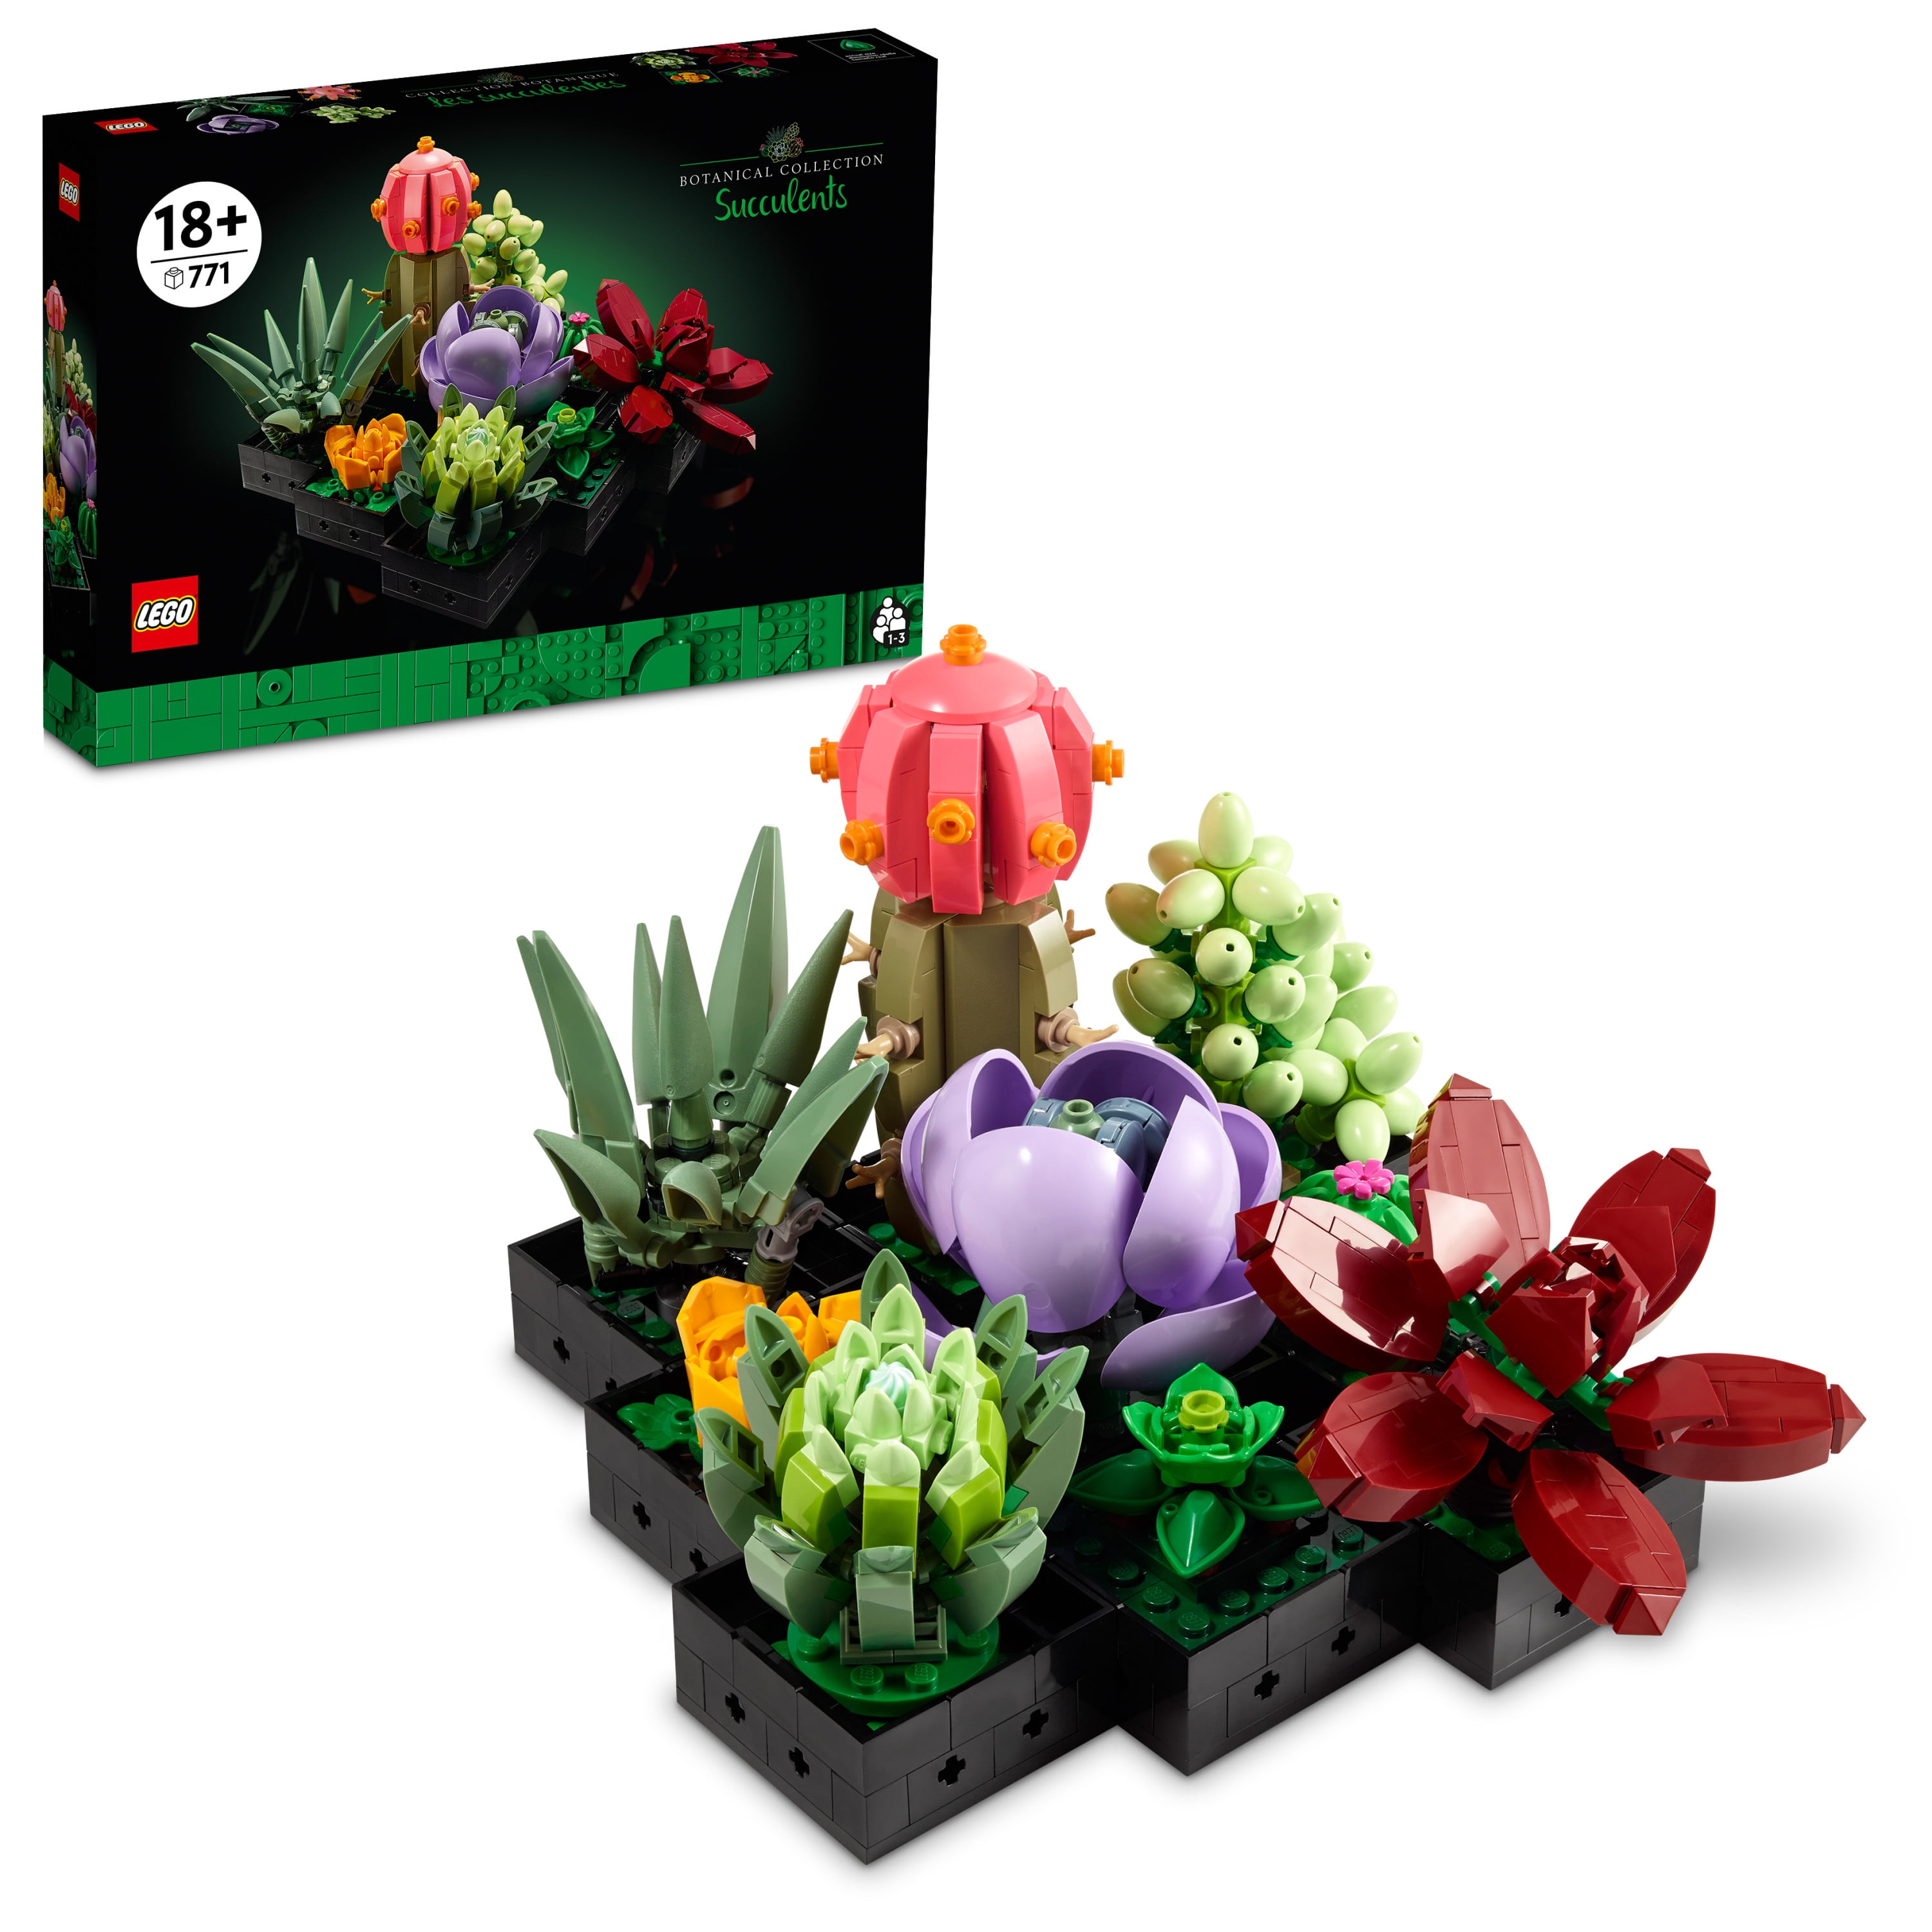 LEGO Orchid 10311 Plant Decor Building Set for Adults; Build an Orchid Display Piece for The Home or Office 608 Pieces 